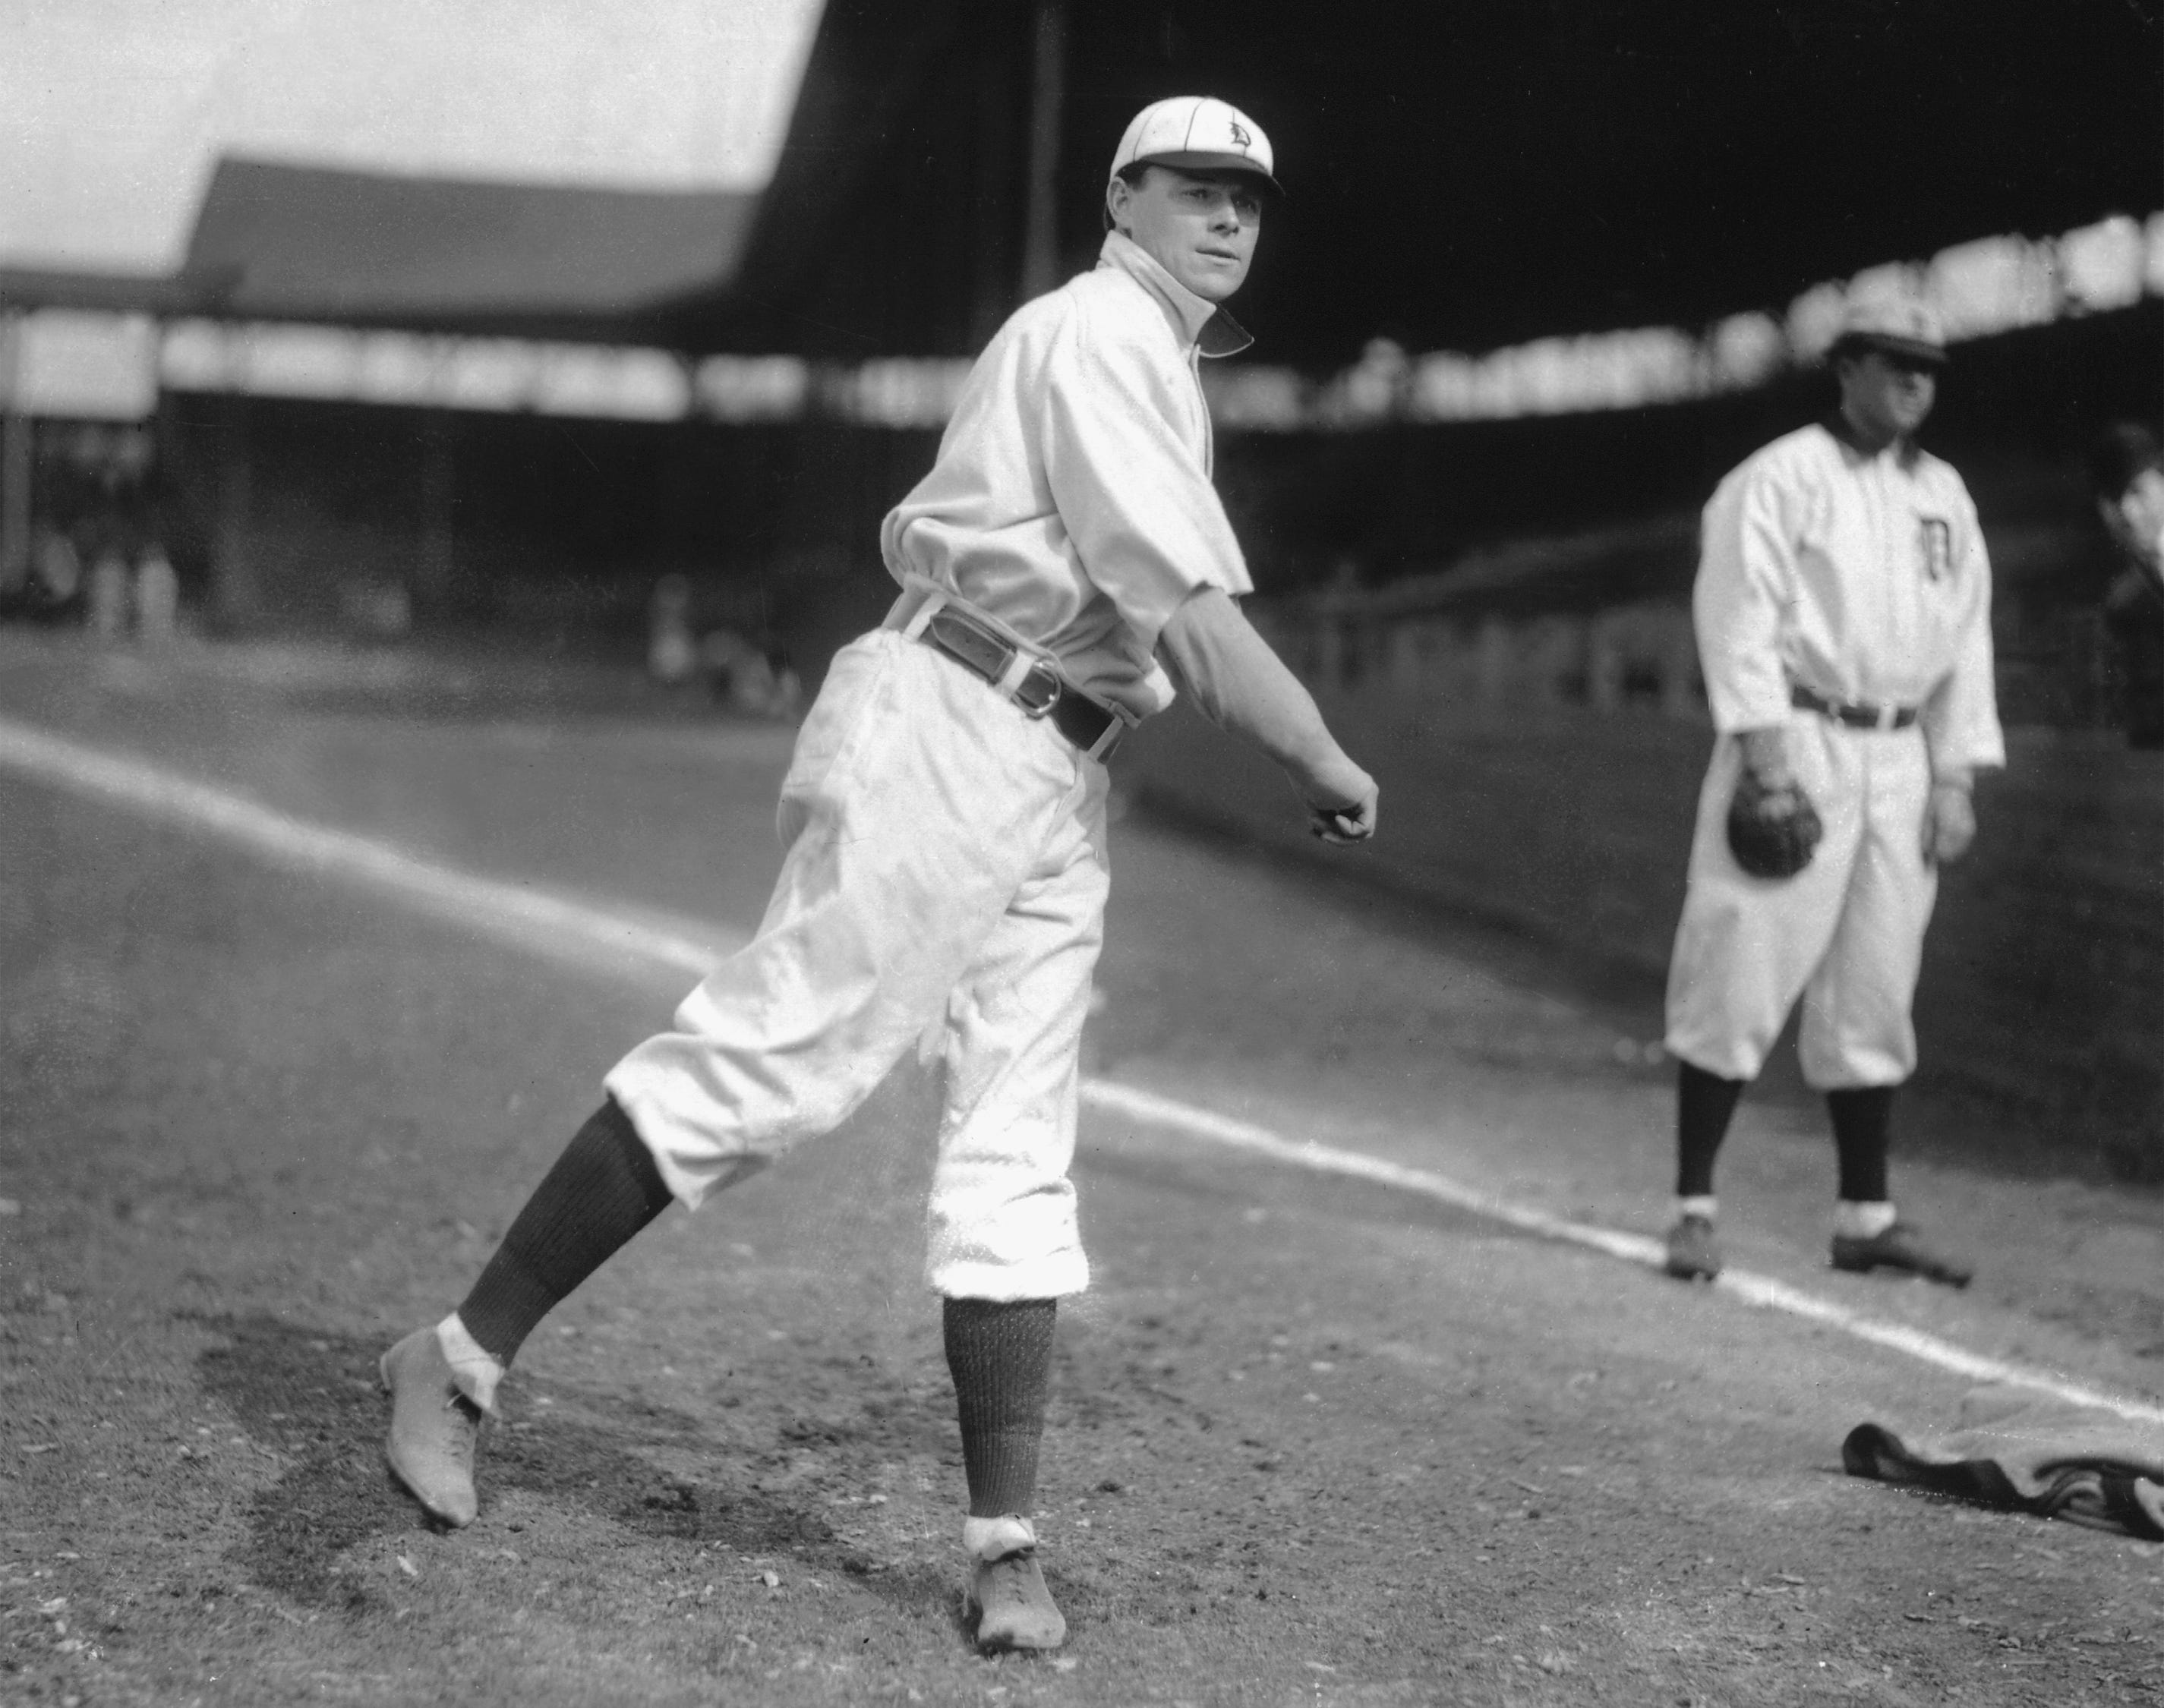 George Mullin, July 4, 1912: Mullin blanked the St. Louis Browns, 7-0, to spin the Tigers' first no-hitter. Mullin not only accomplished the feat on a national holiday, it was also his 32nd birthday.